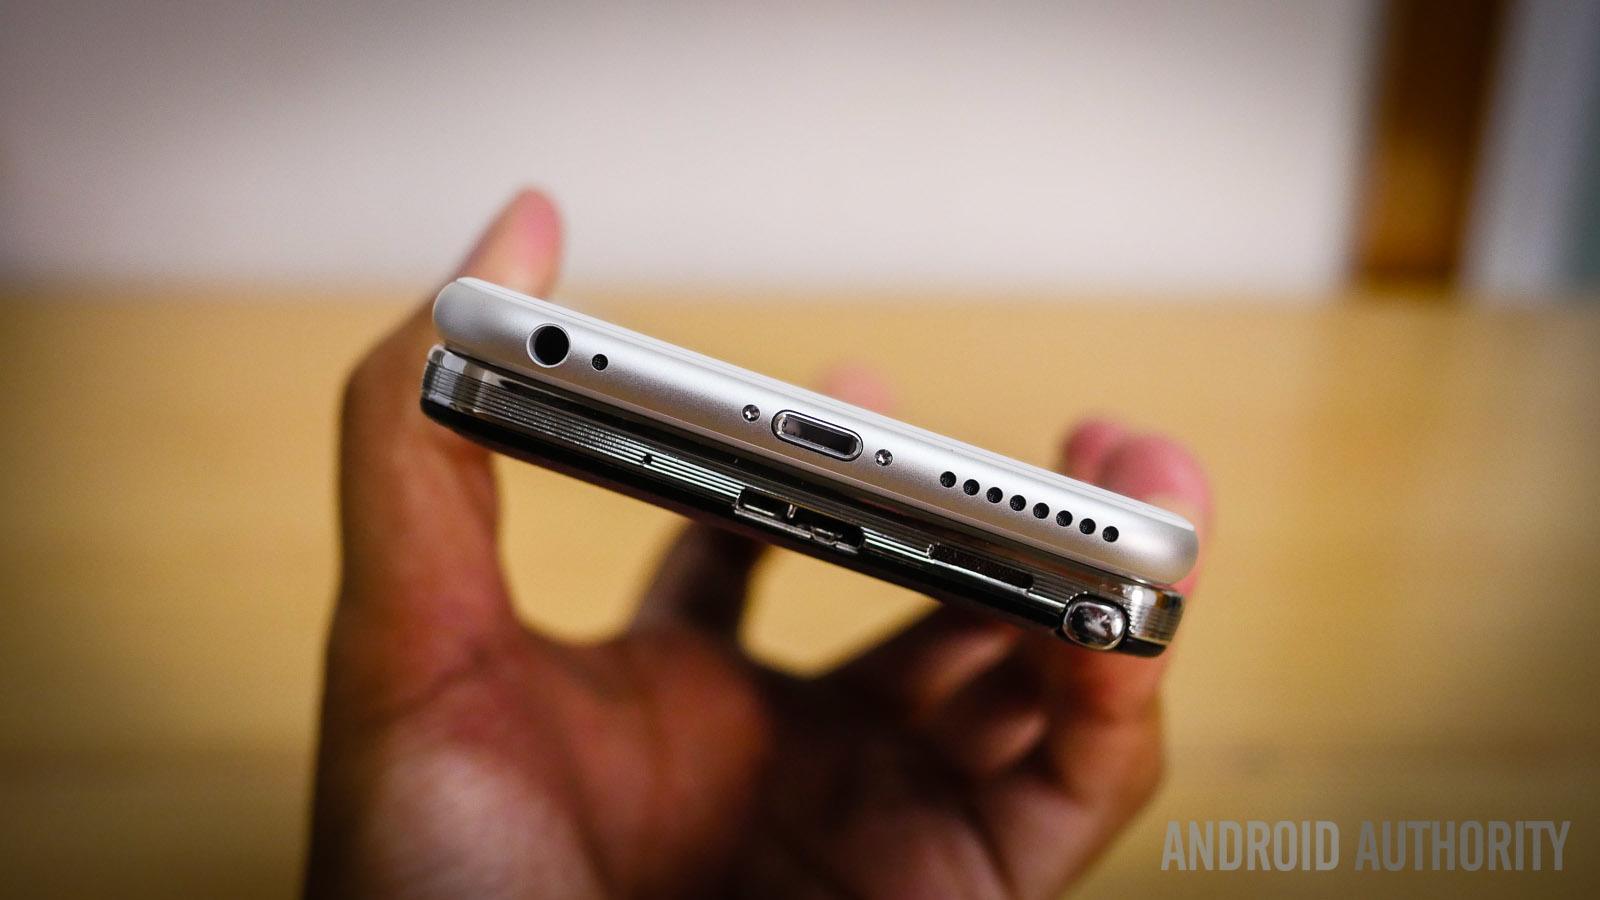 iphone 6 plus vs samsung galaxy note 3 quick look aa (8 of 20)